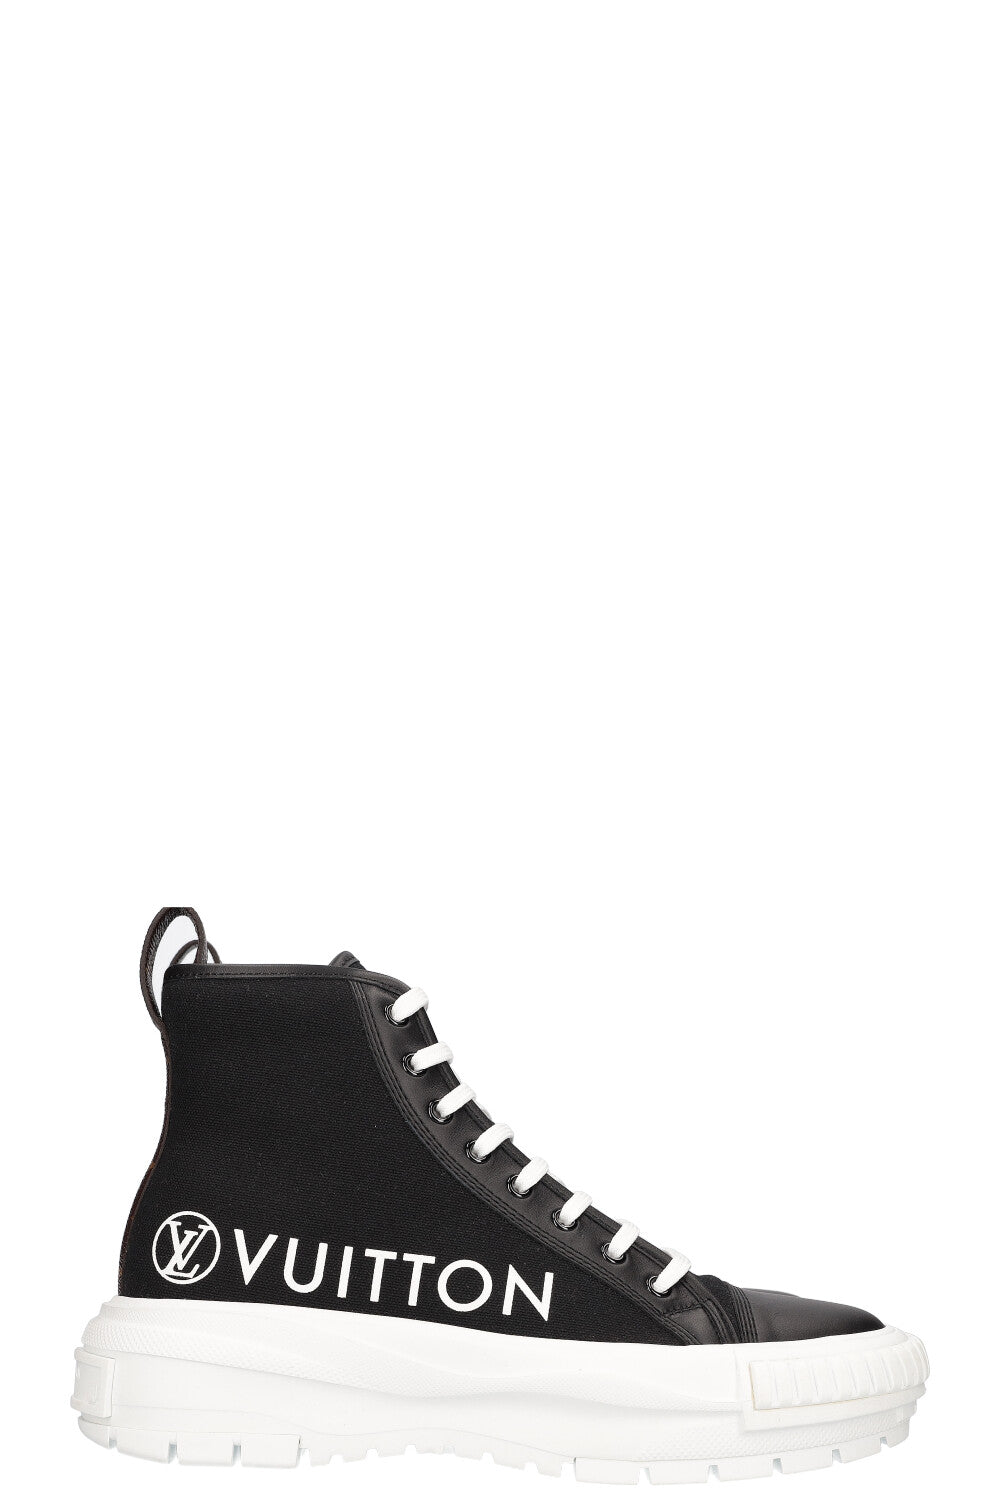 Louis Vuitton lv squad sneaker boot • Message or email me for price and  purchasing info.